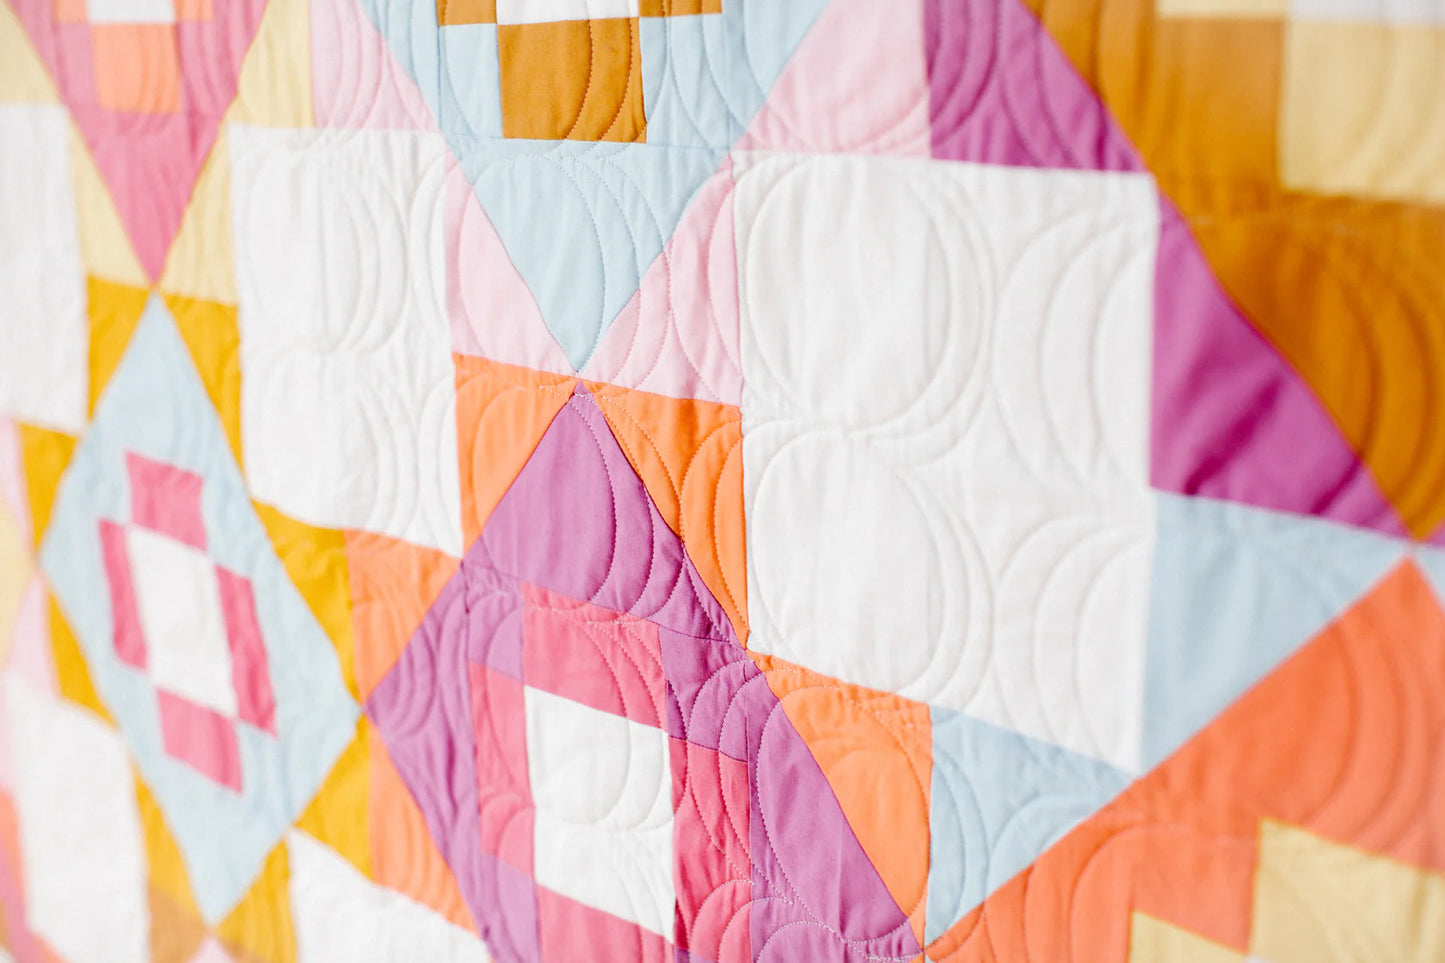 Meadowland Quilt Pattern : Then Came June